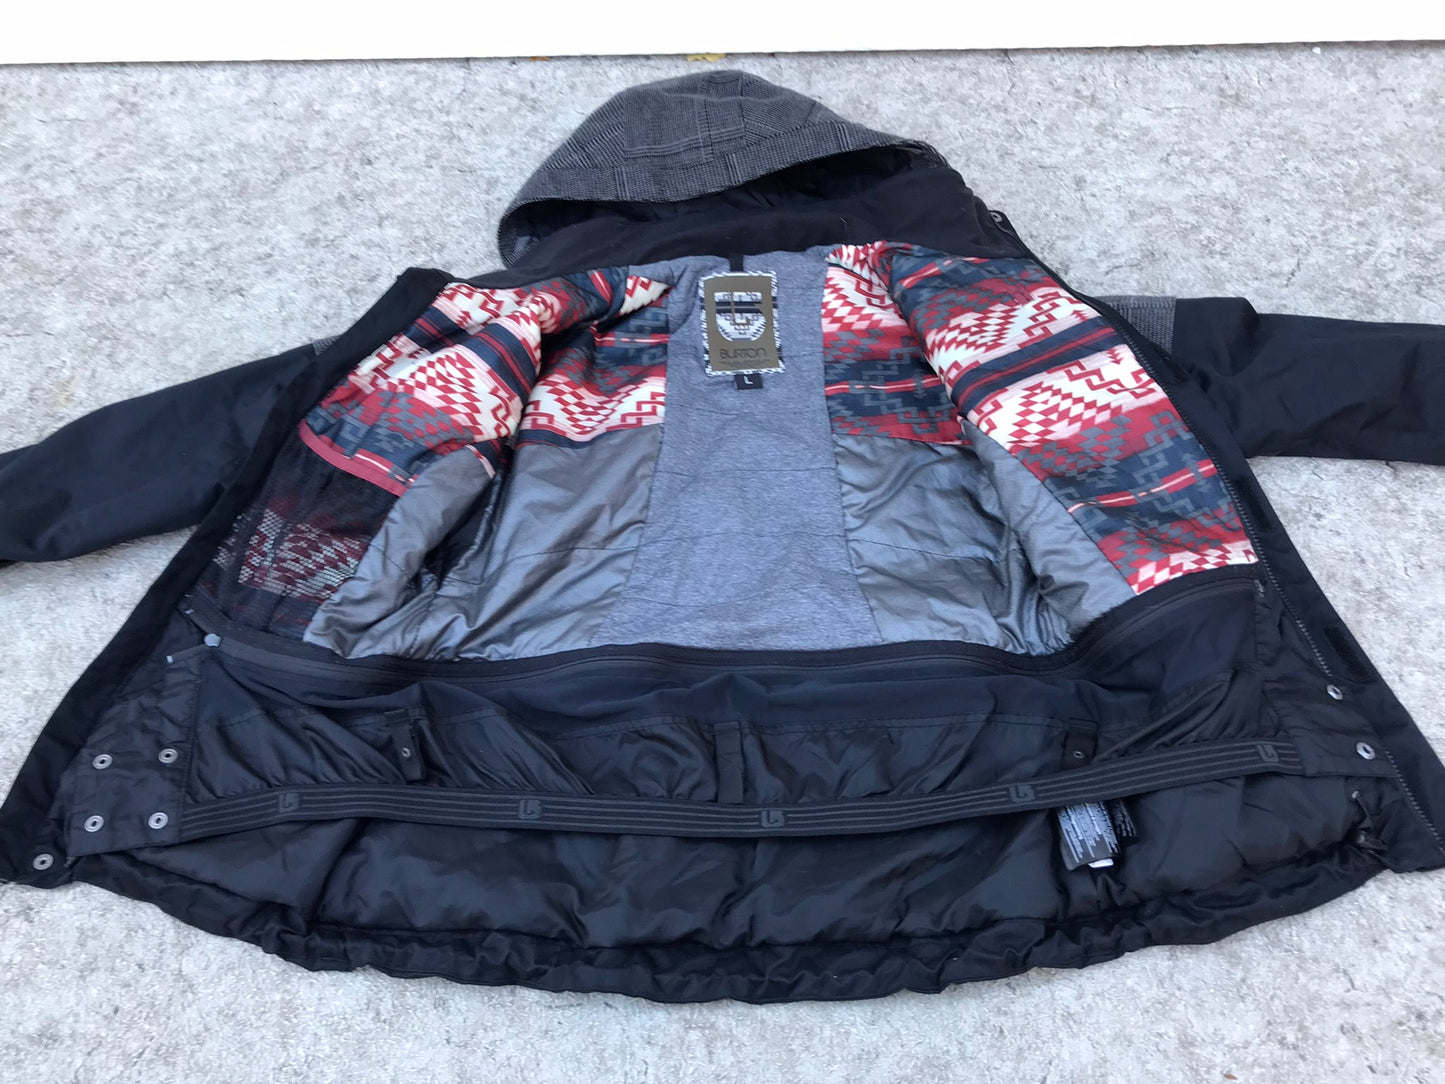 Winter Coat Child Size 14 Youth Burton Snowboarding Black With Snow Belt Outstanding Quality